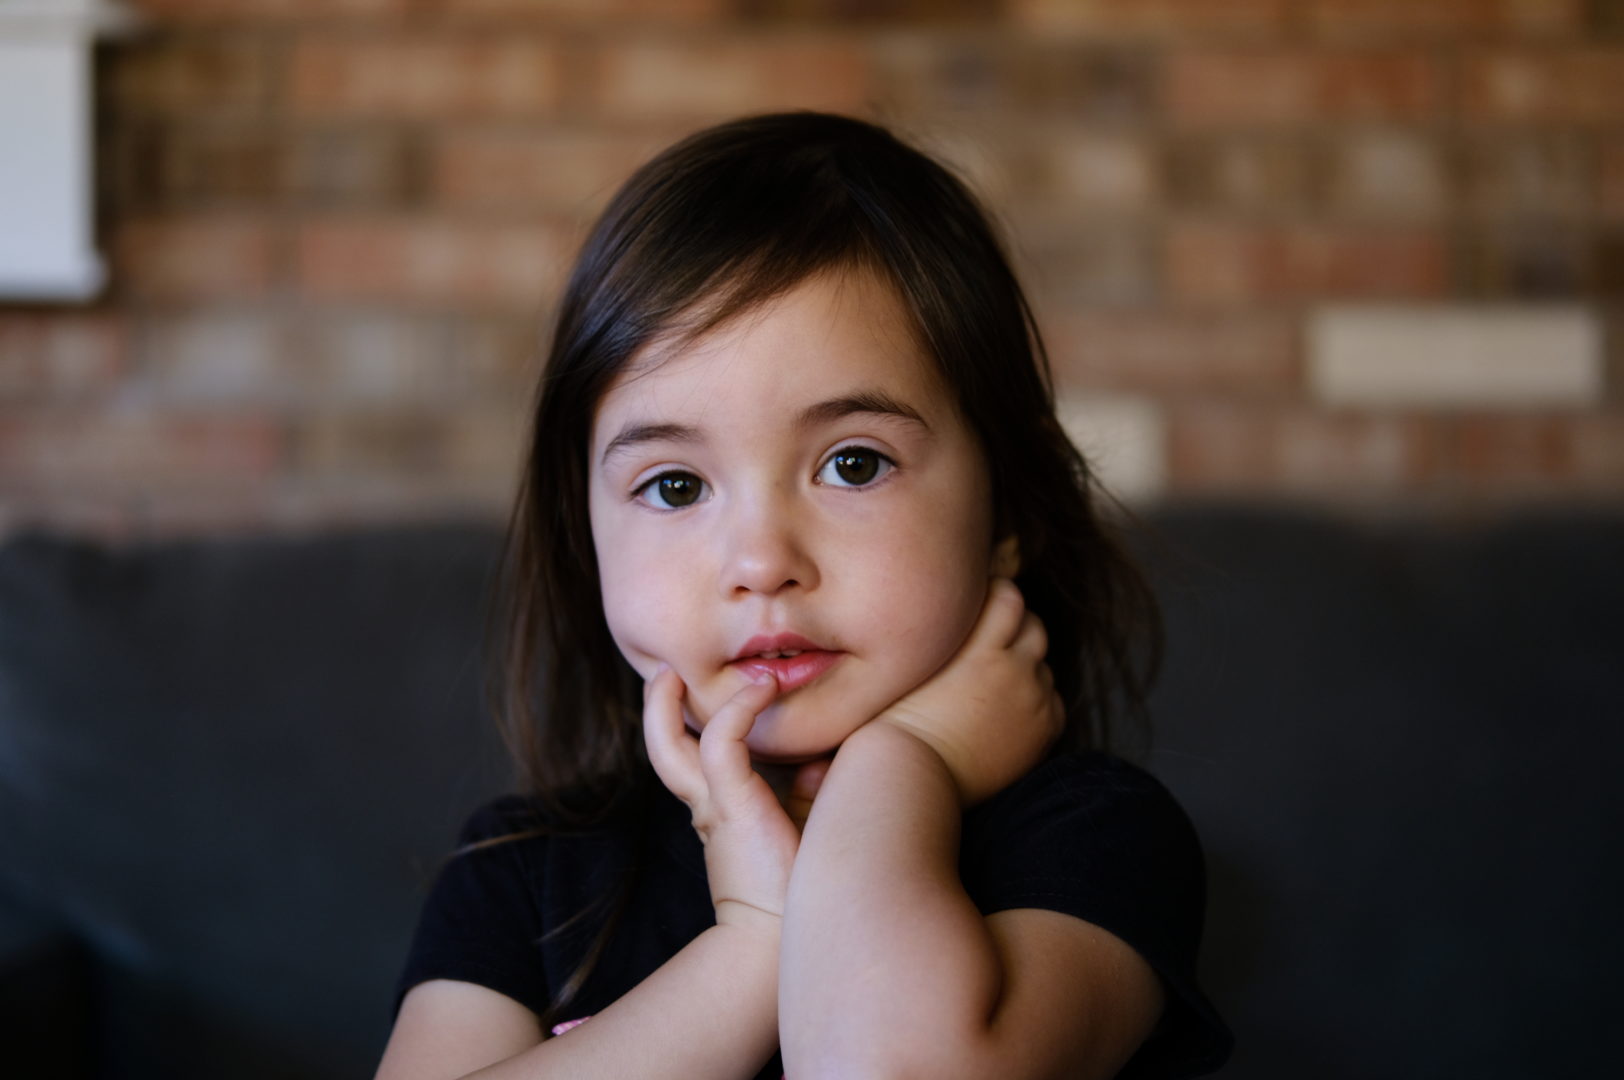 A 2 year old girl poses for the camera against a brick wall.